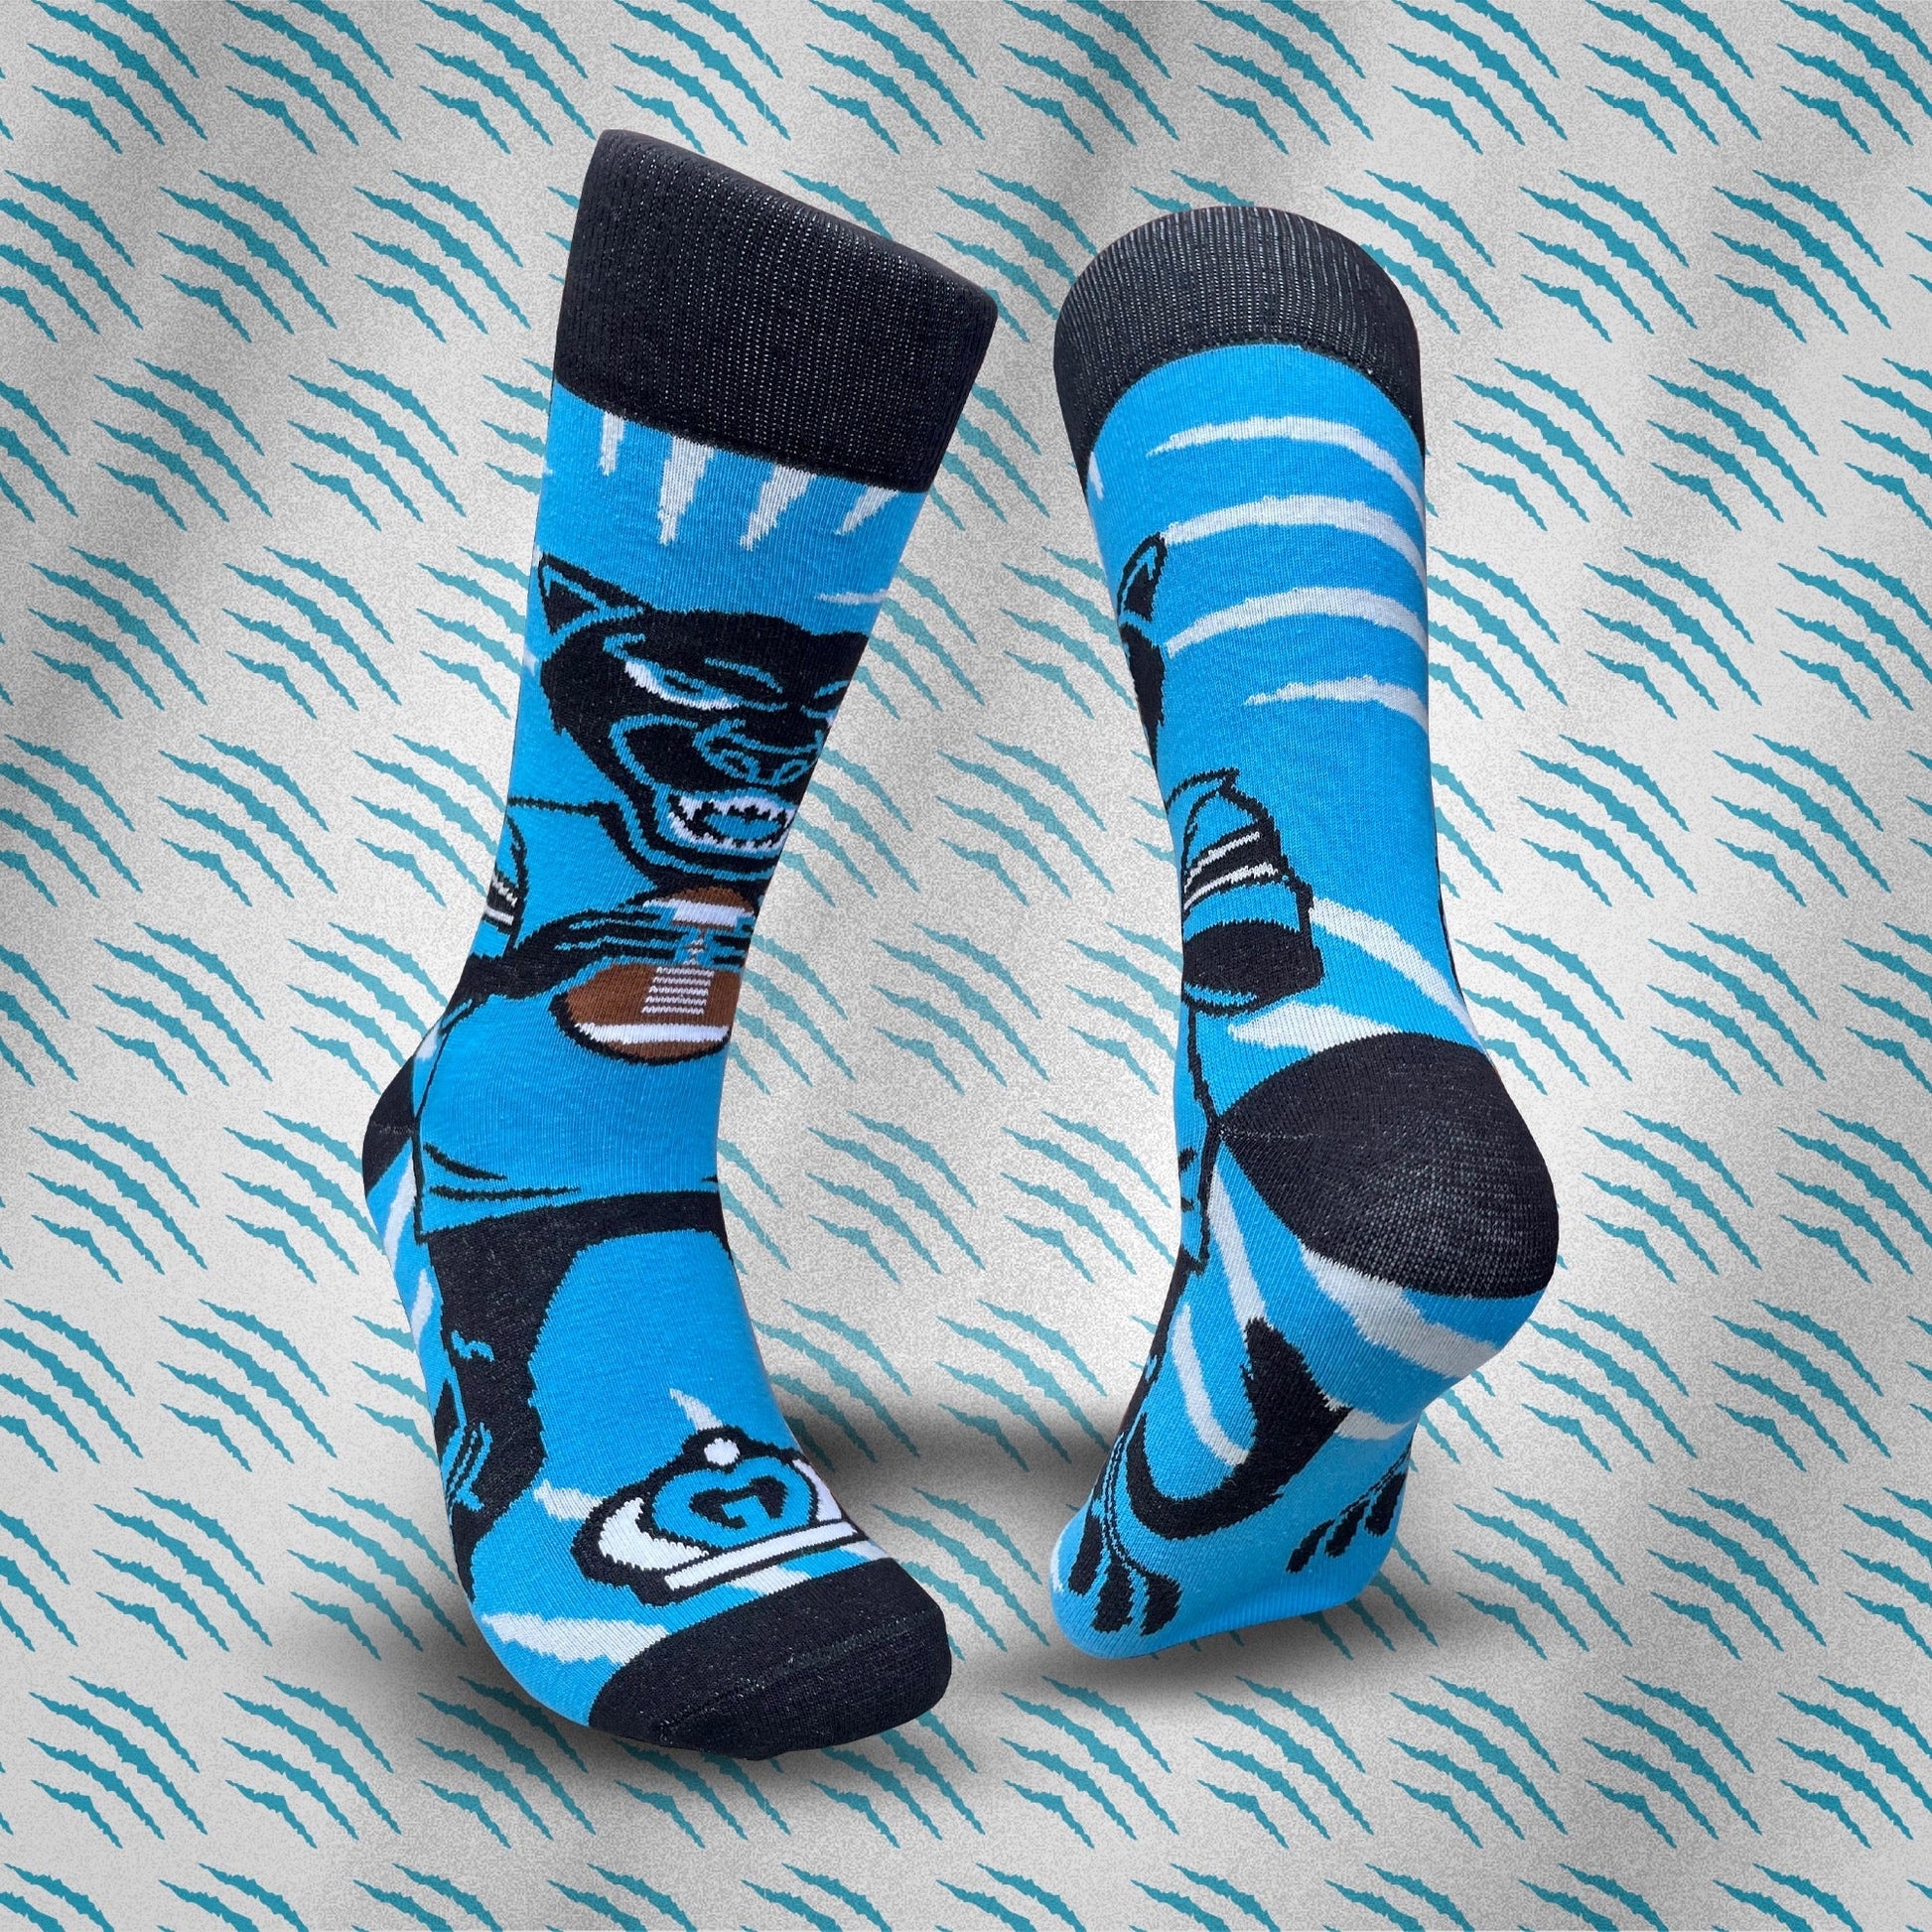 Panthers sock